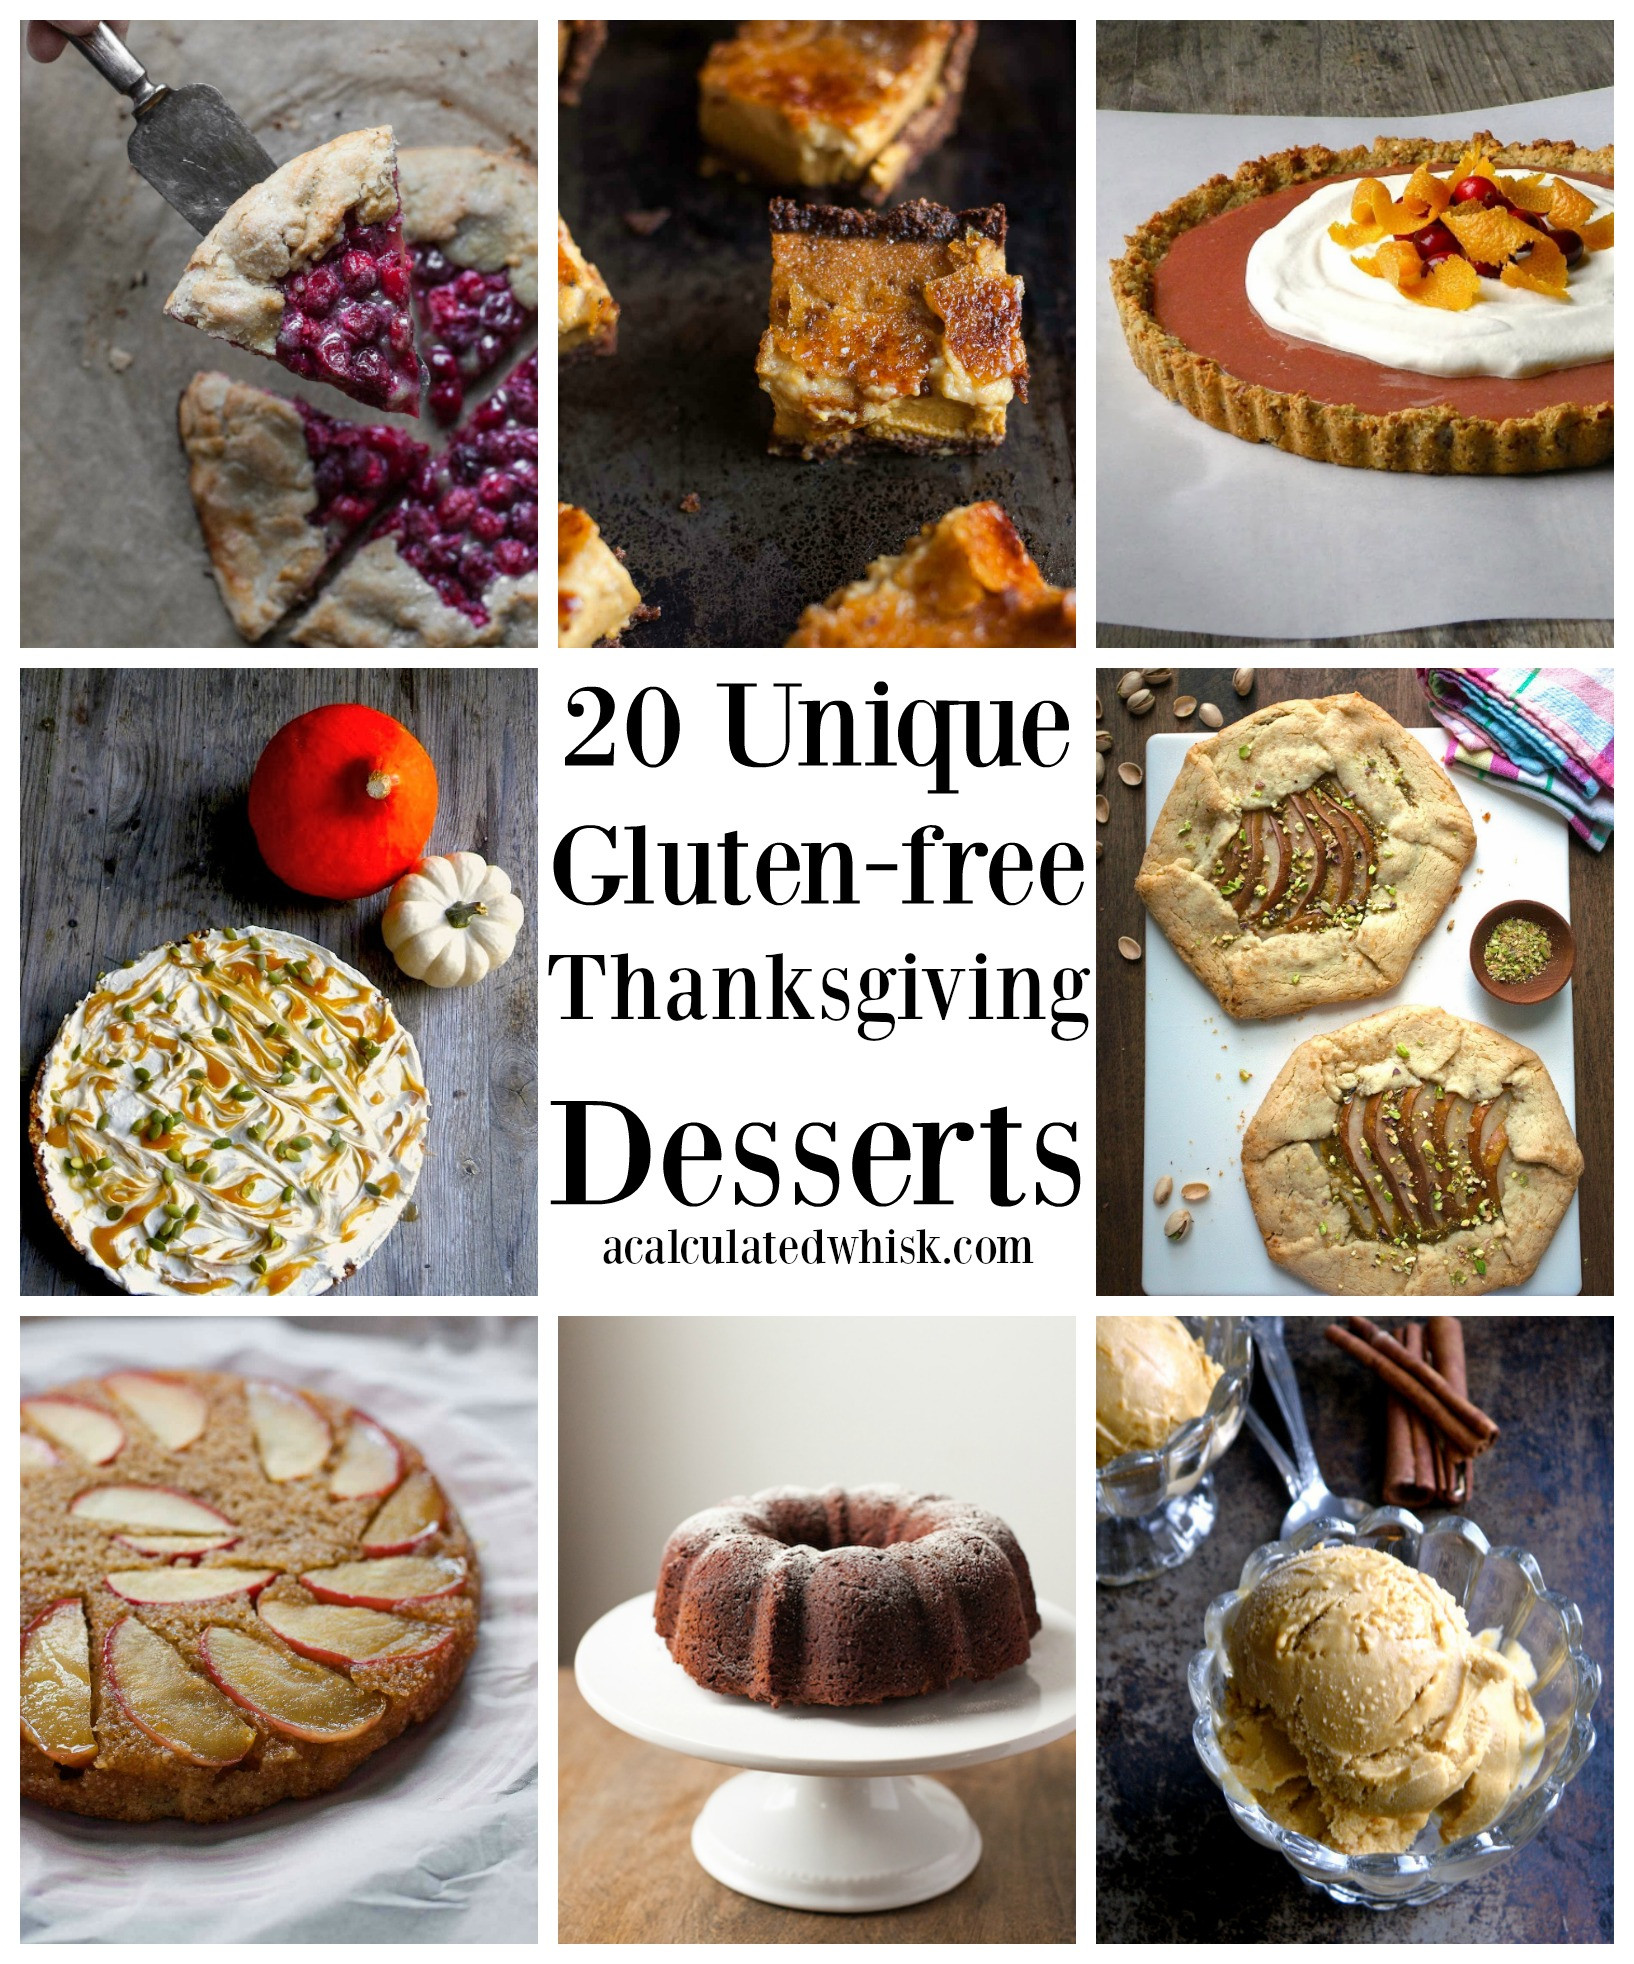 Dairy Free Thanksgiving Recipes
 20 Unique Gluten free Thanksgiving Desserts A Calculated